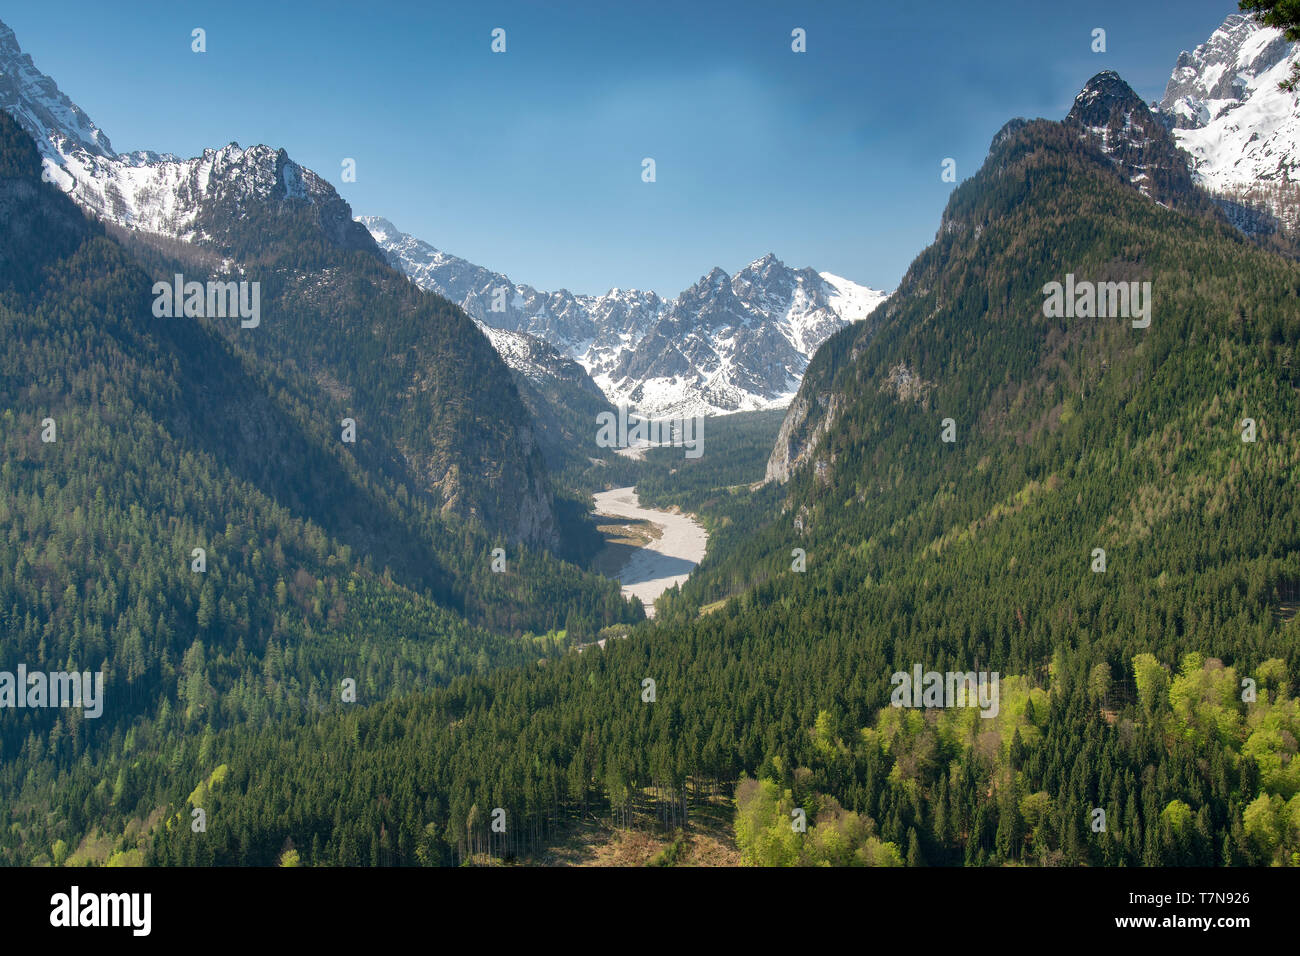 Rubble flow at Wimbachtal Valley at Berchtesgaden National Park with the Palfelhoerner, Hochkalter and Watzmann peaks in the background. Stock Photo